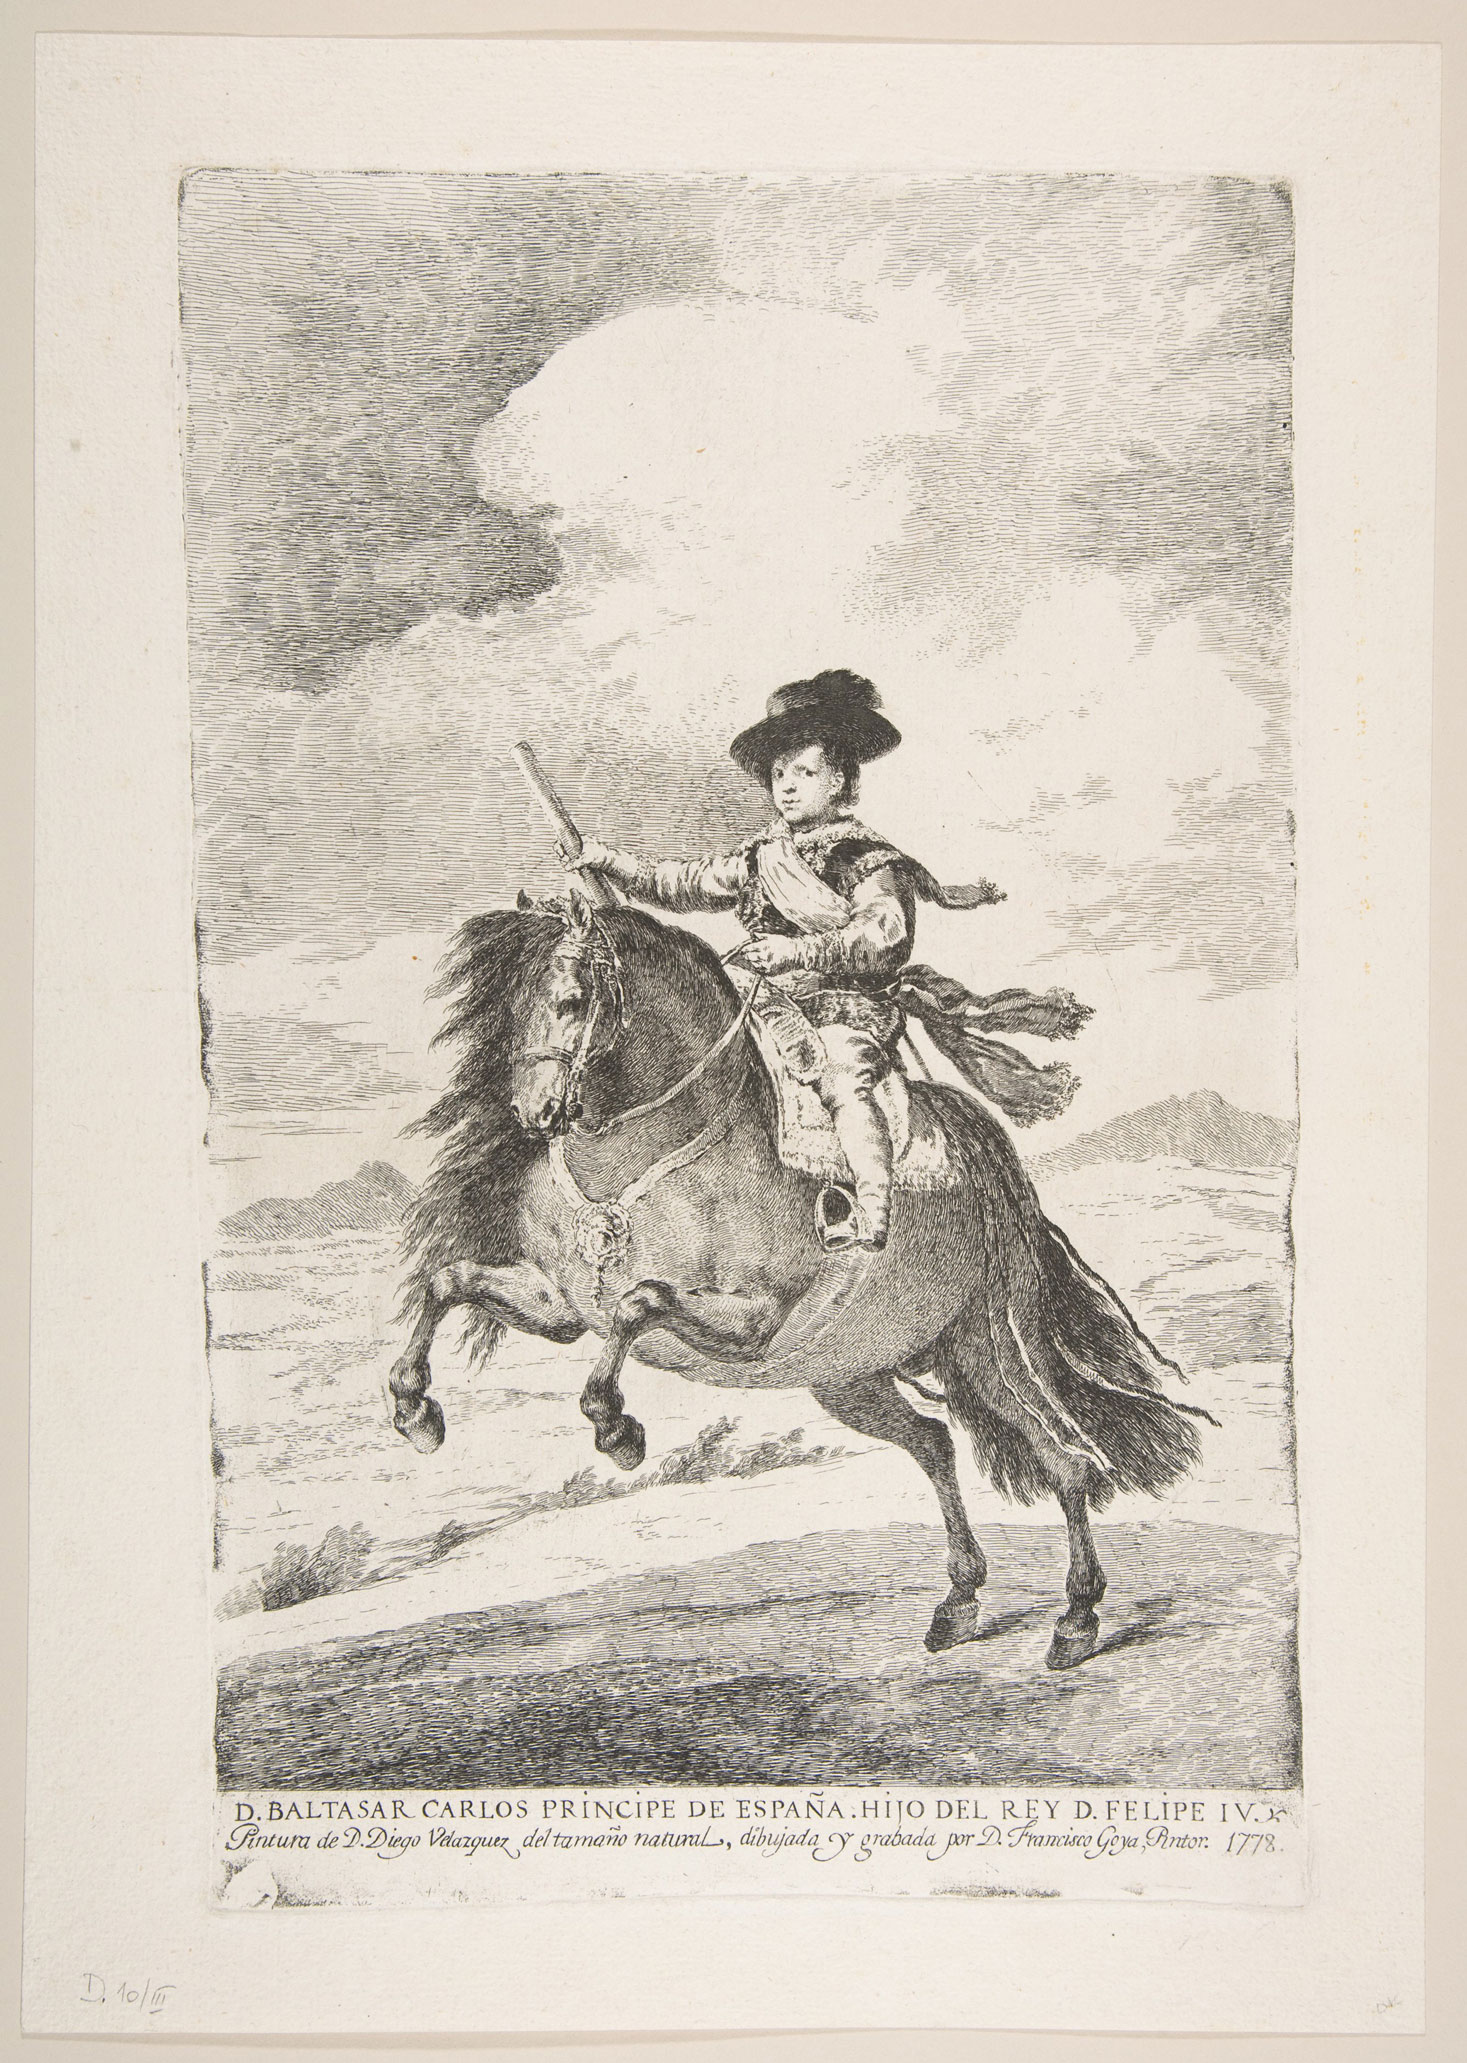 Goya, one of Spain's 4 most famous Artists - Goya's famous Etchings